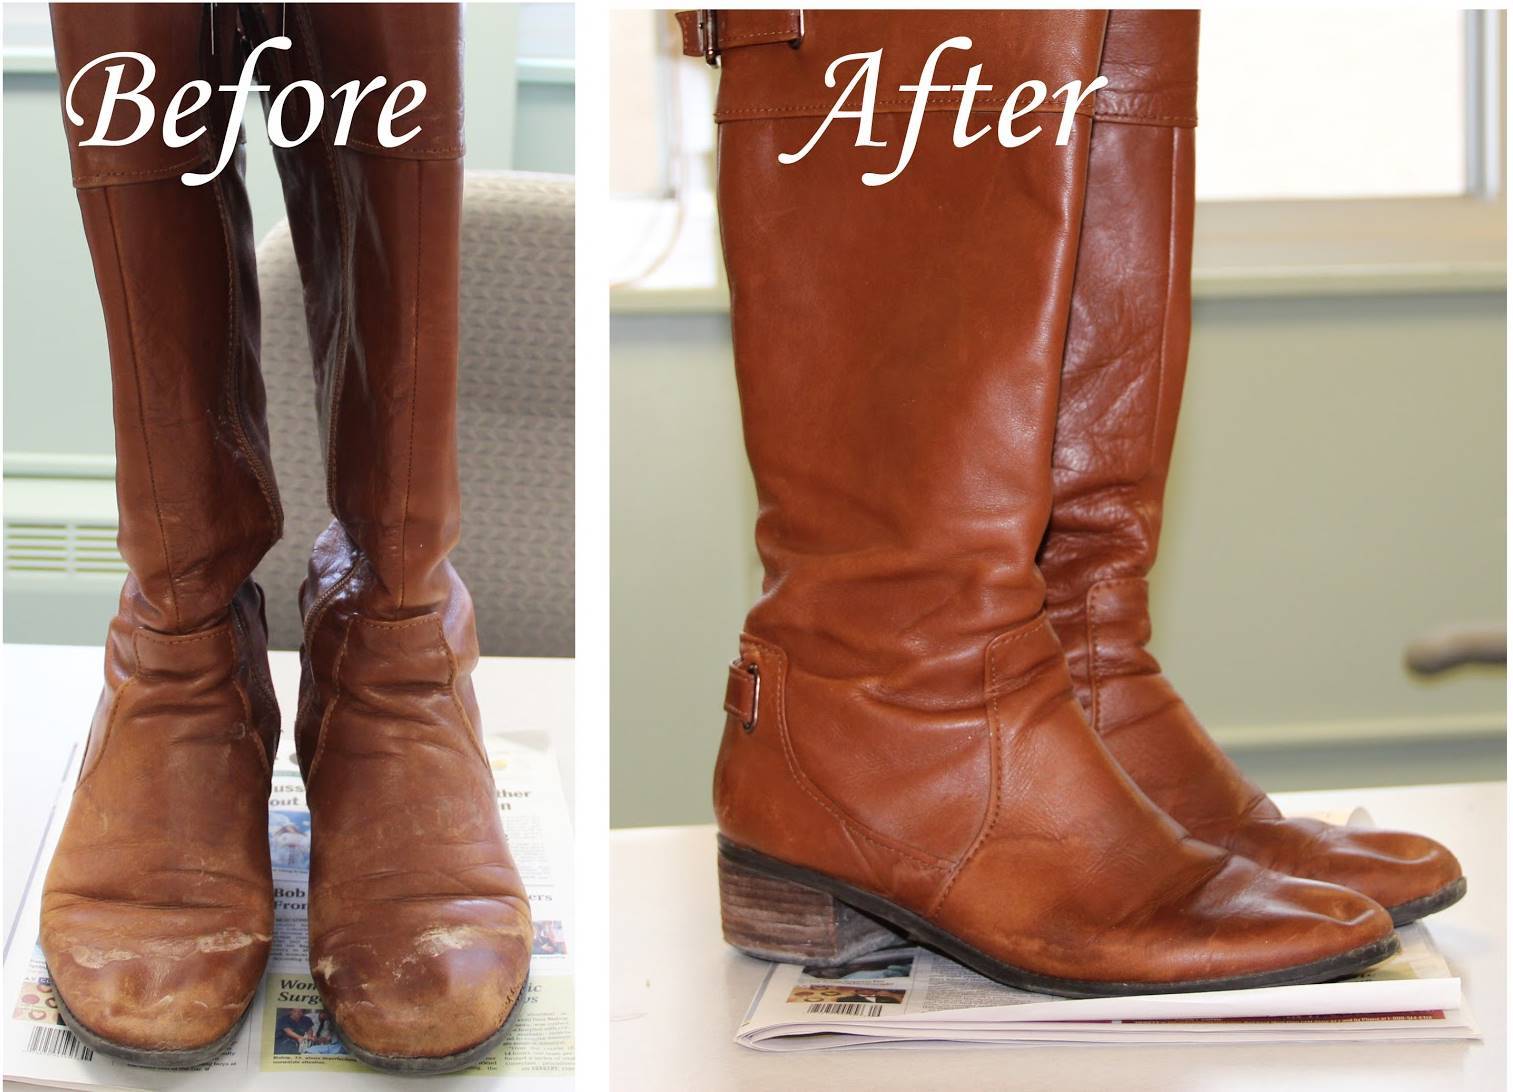 35+ Useful Clothing Hacks Every Woman Should Know --> How to remove salt stains from leather boots